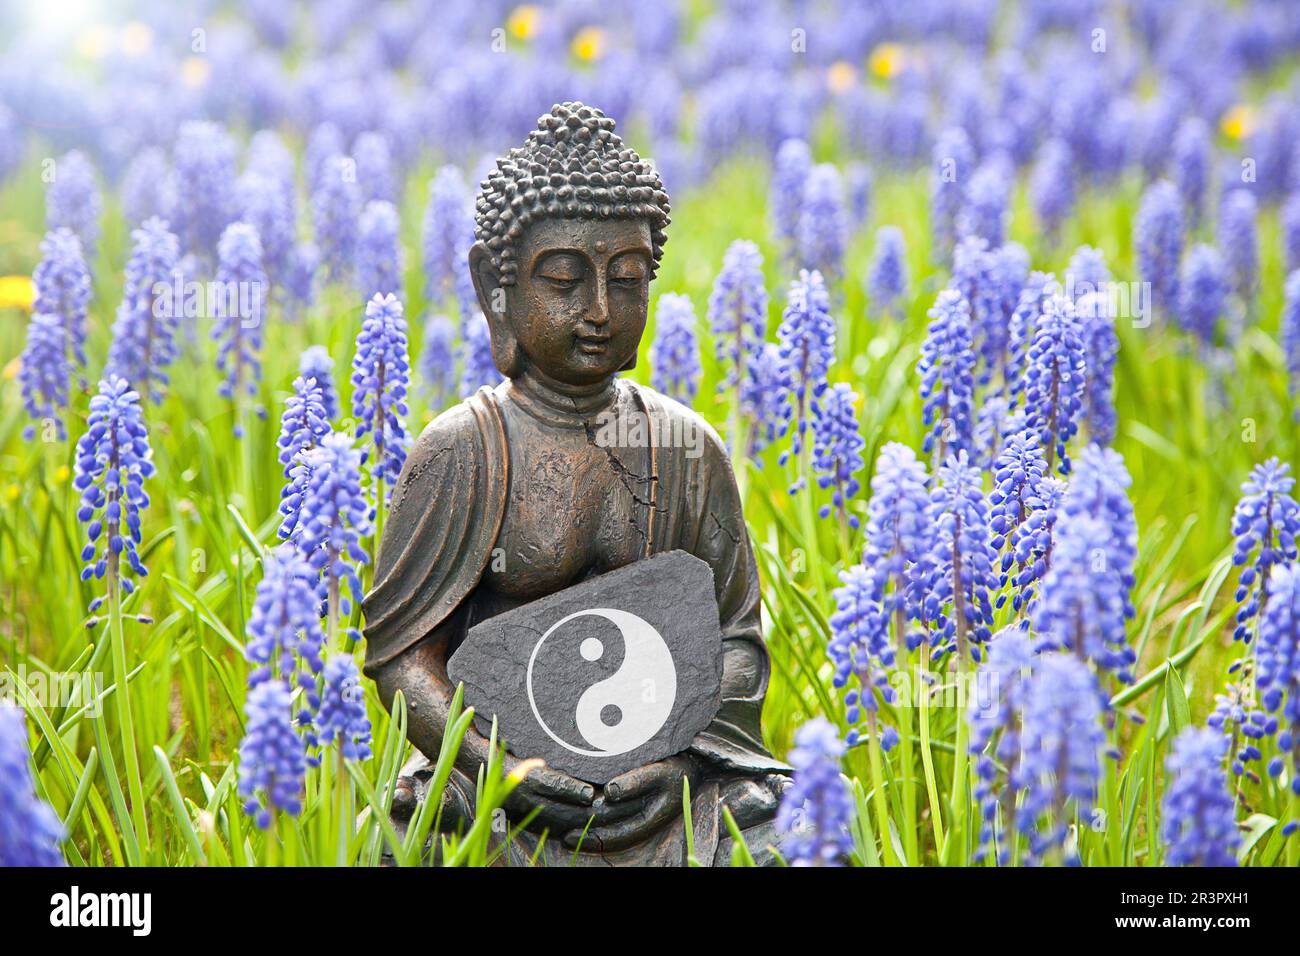 Buddha statue sitting on a meadow with grape hyacinths with the ying yang symbol, Taijitu Stock Photo